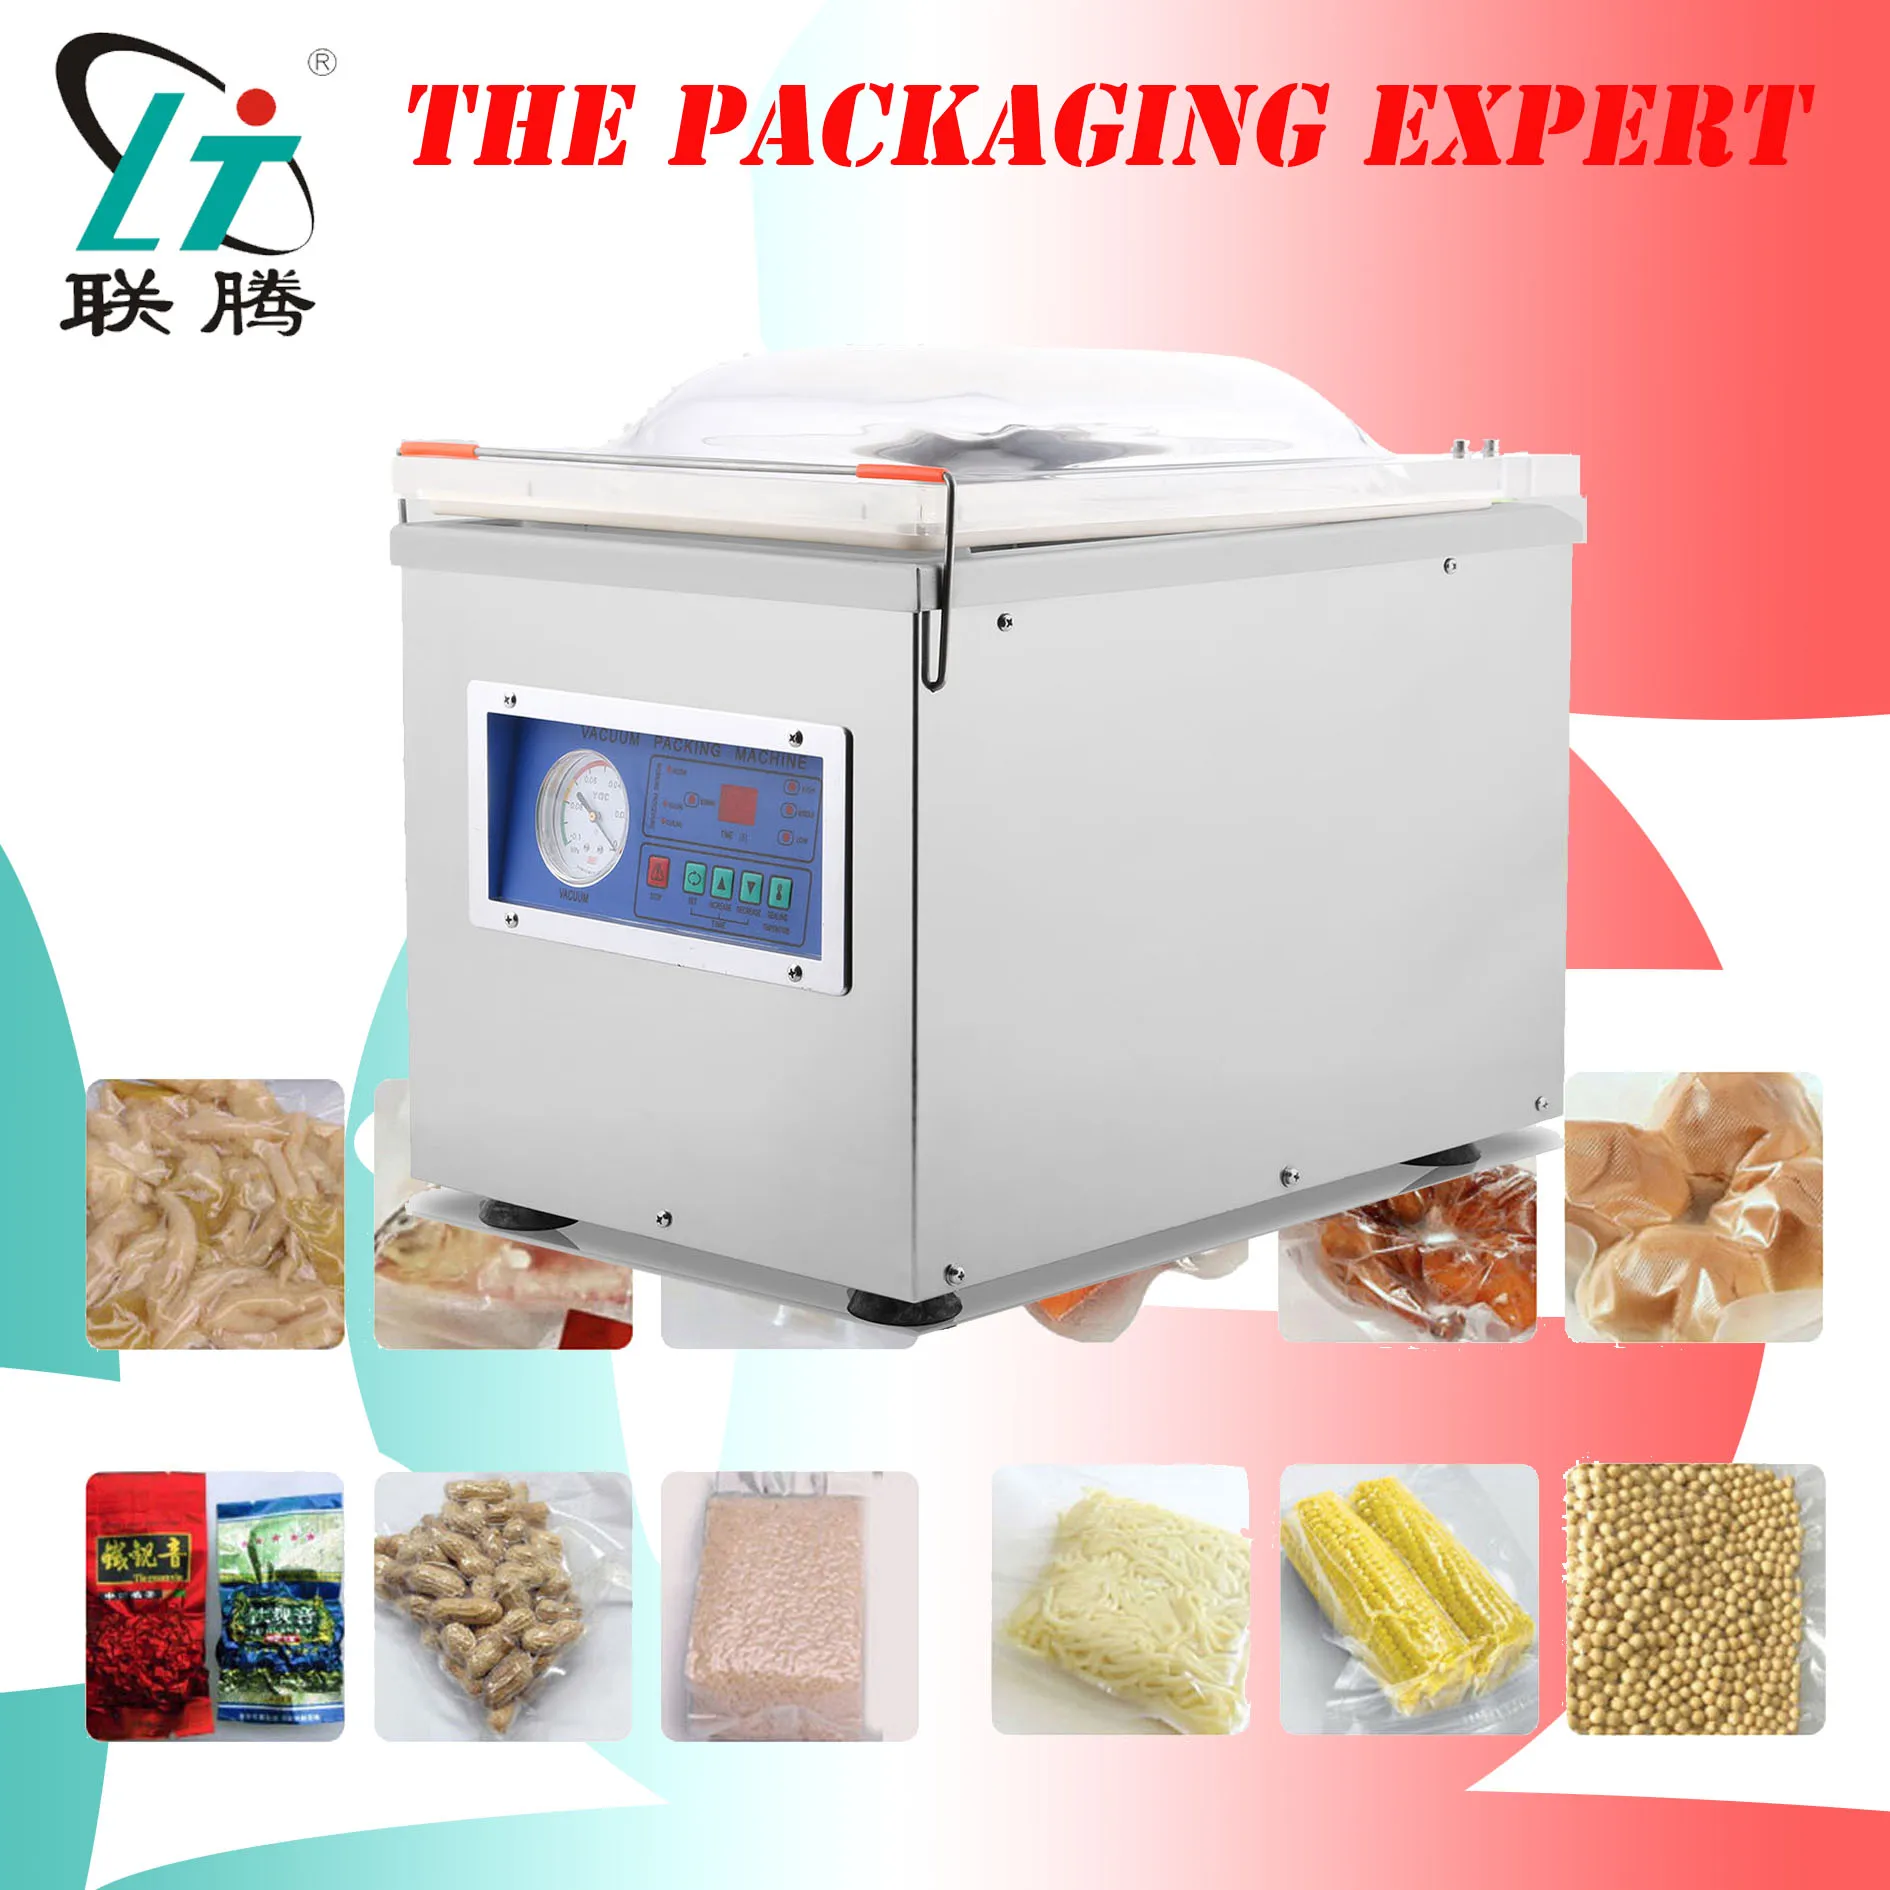 

Vacuum Sealing Machine Food Vaccum Sealer Packing Machine Big Pump Chamber Pouch Bags Food Rice Meat Fish Tea CE Free Shipping